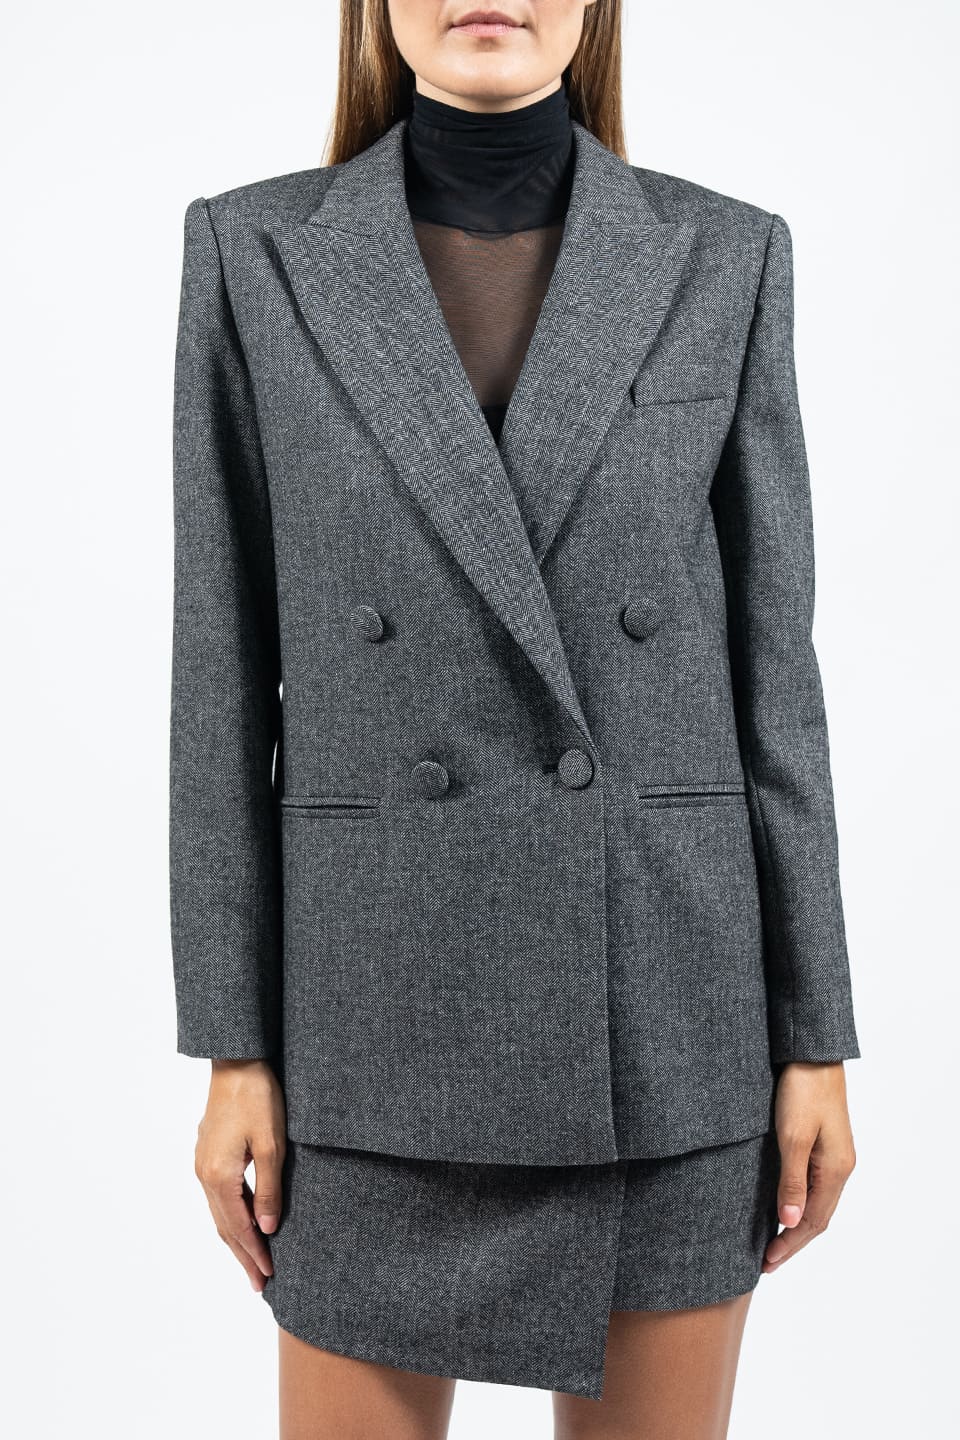 Shop online trendy Grey Women blazers from Federica Tosi Fashion designer. Product gallery 1